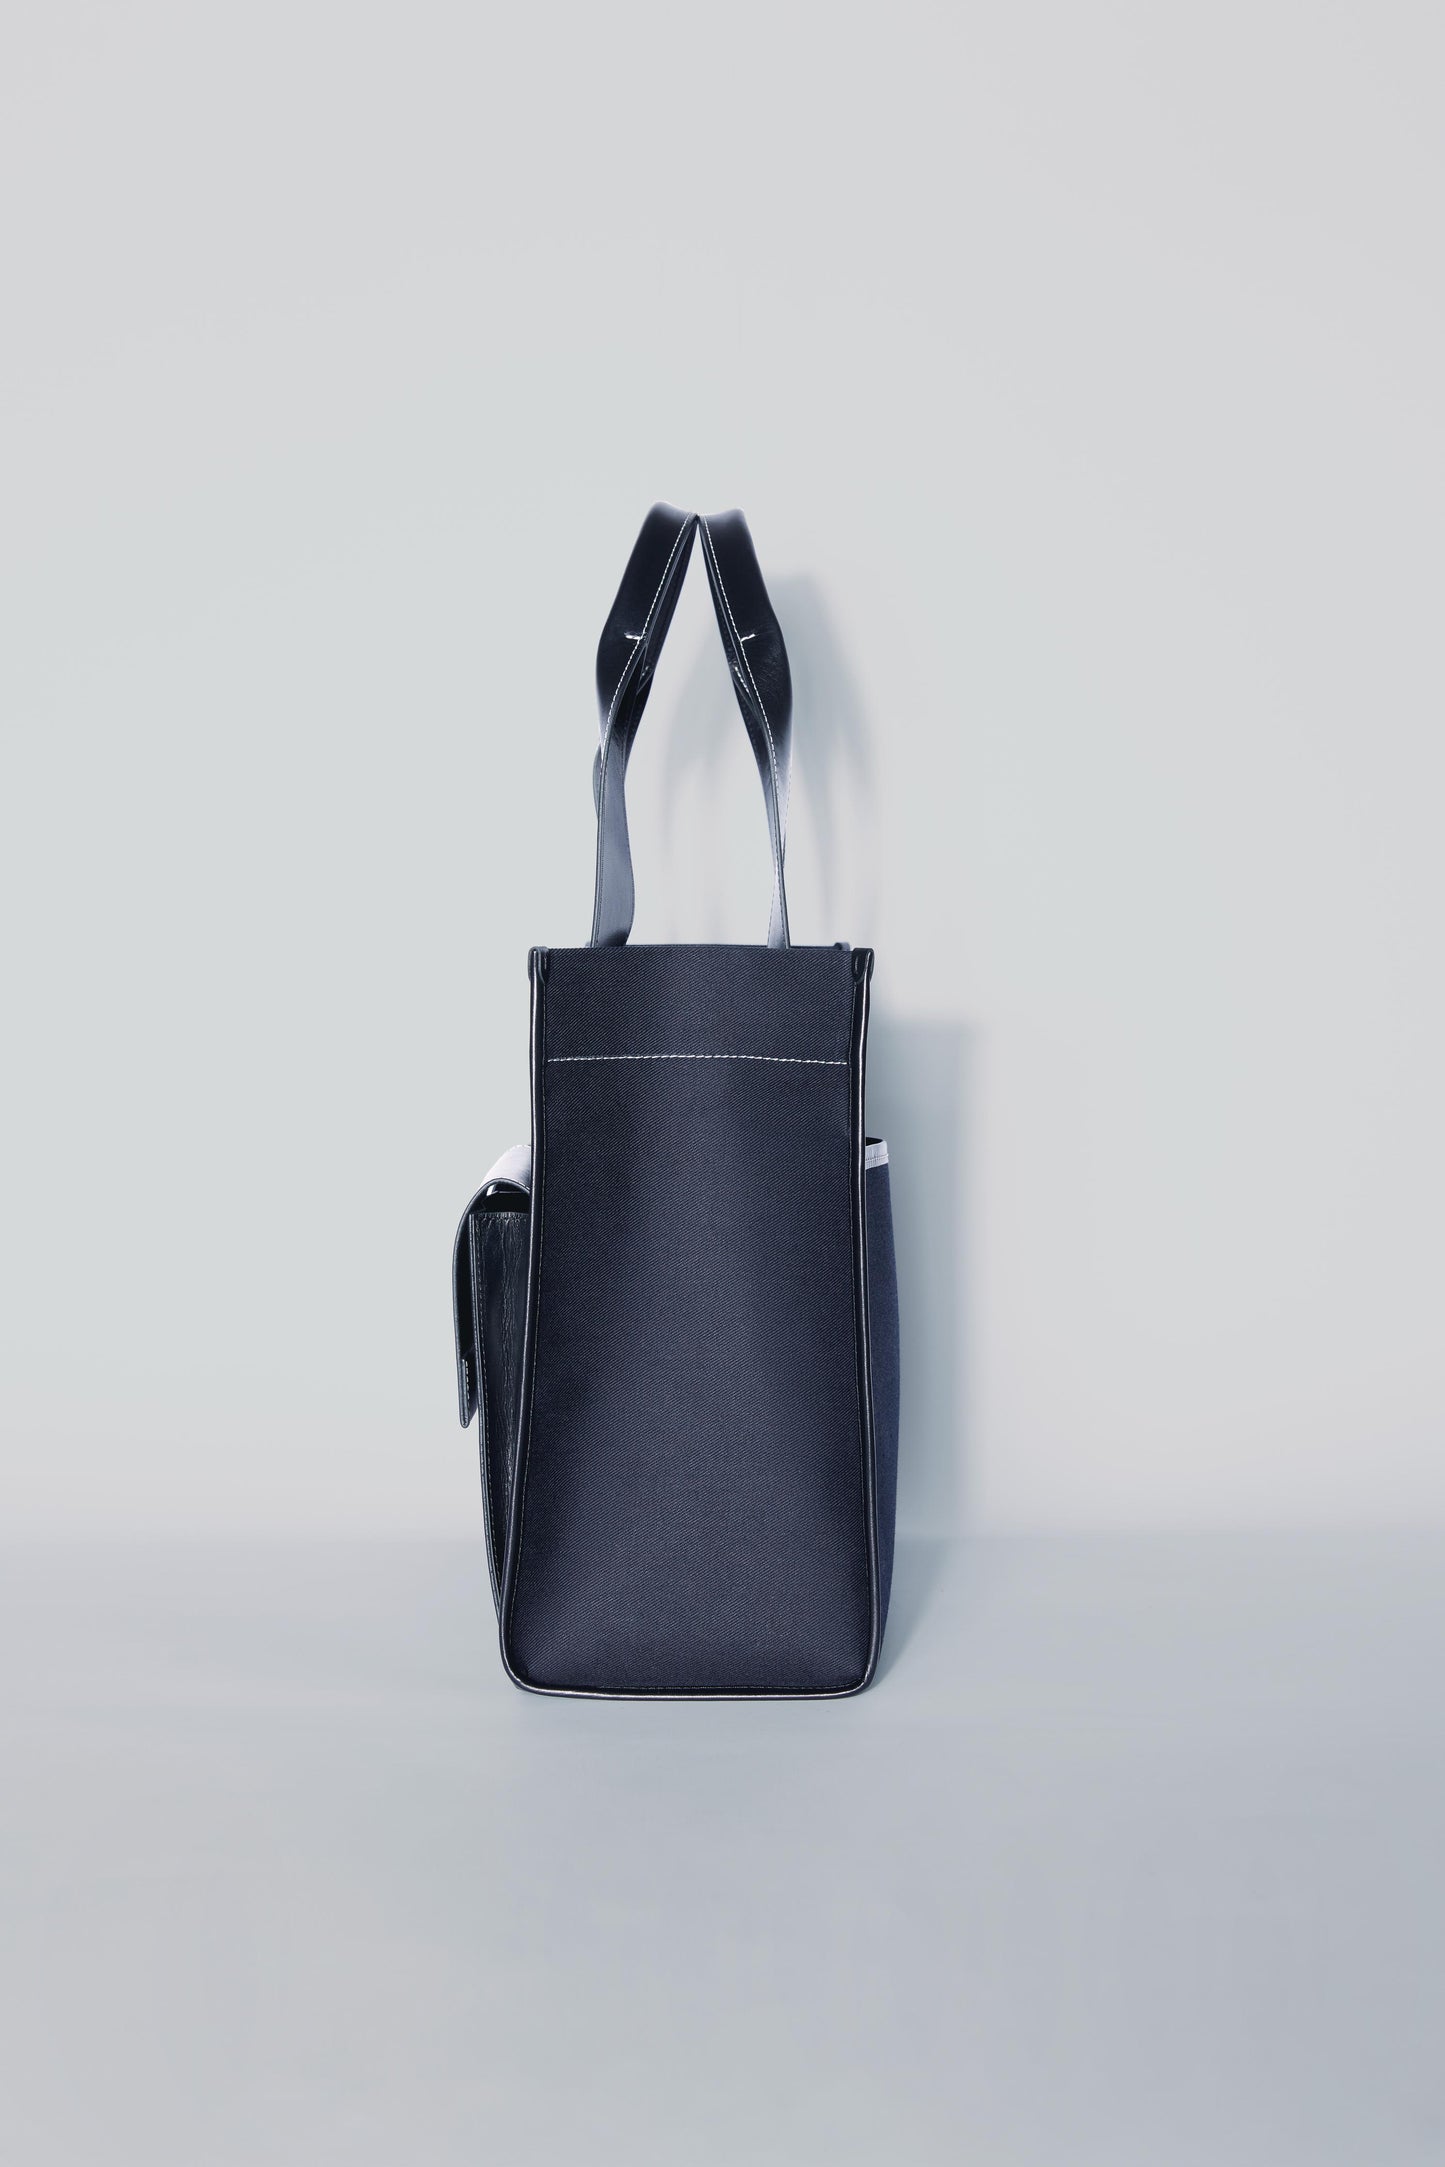 STITCHED POCKET MAXI TOTE IN NAVY AND BLACK